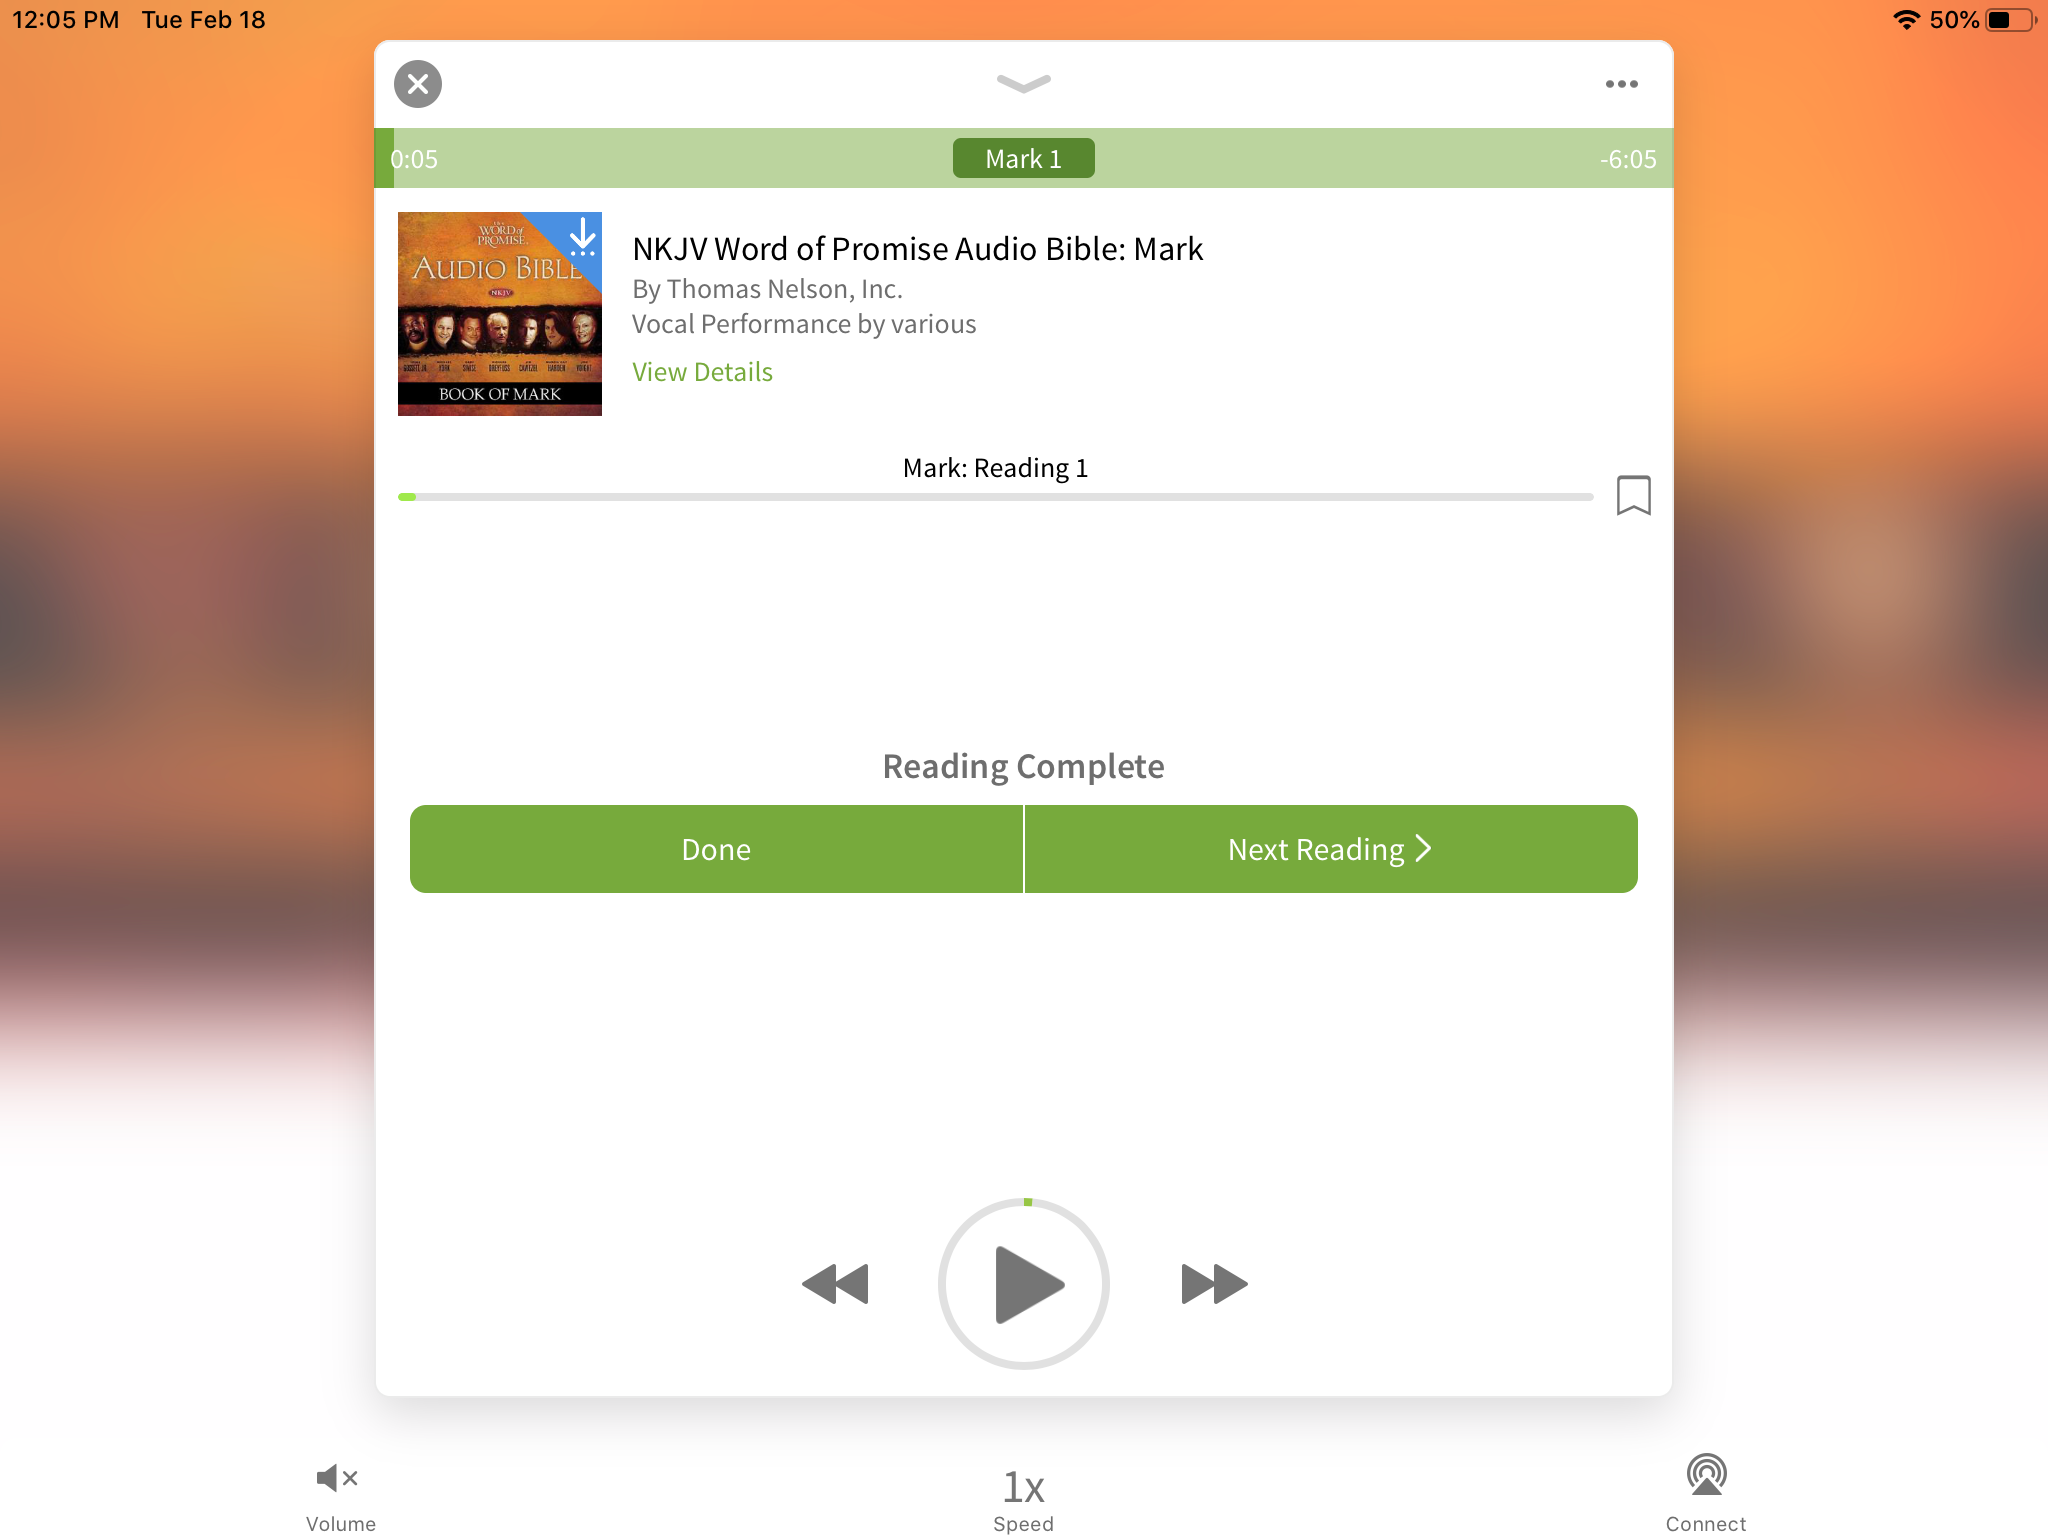 completed audio bible reading